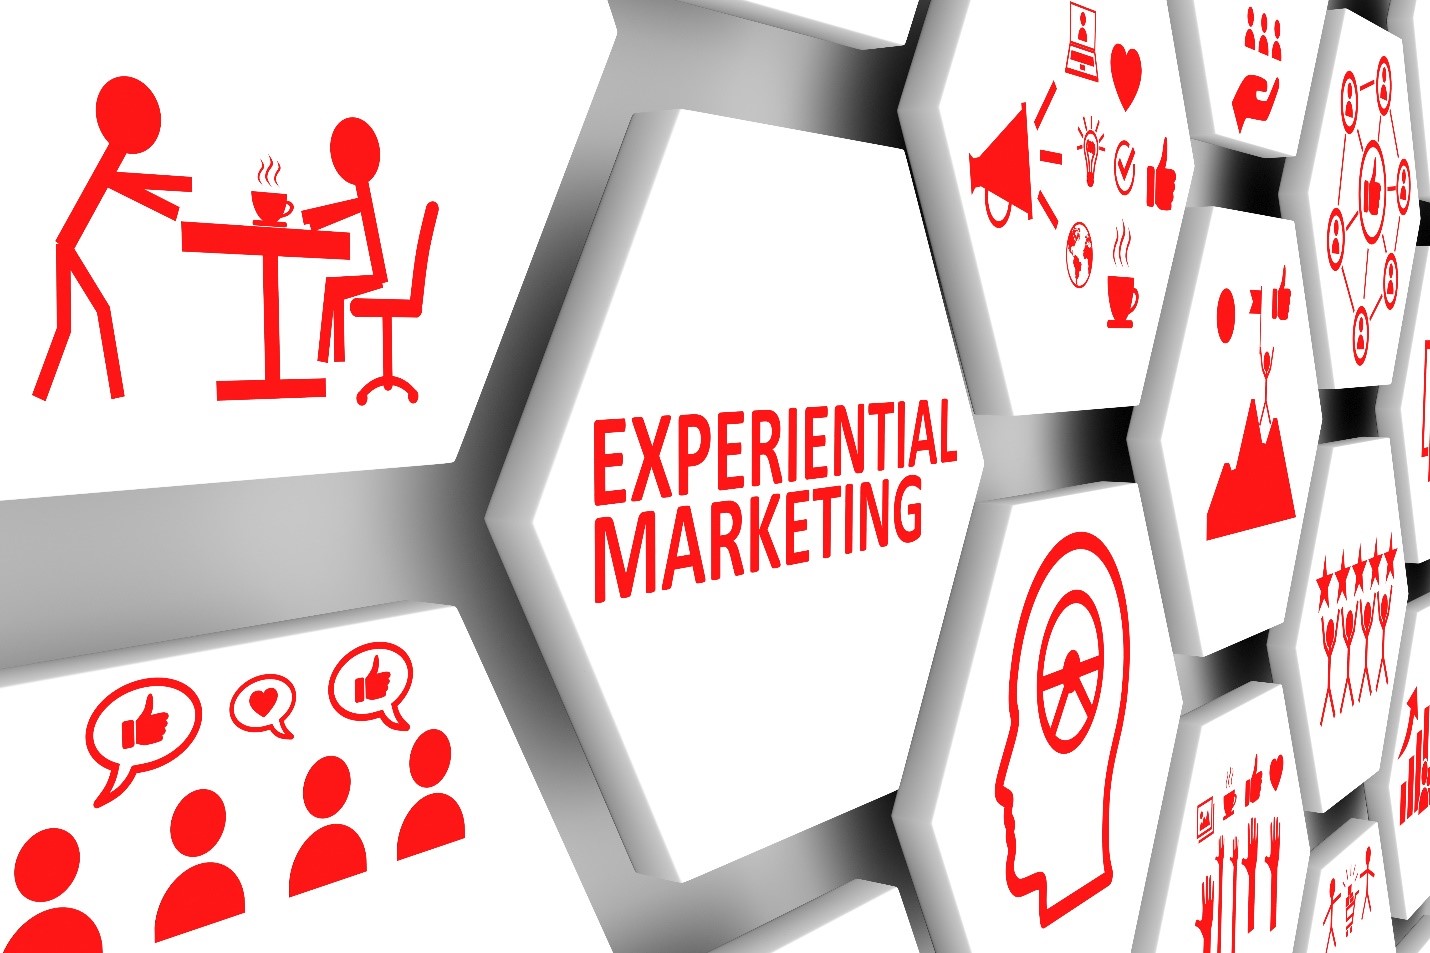 How can experiential marketing grow your brand globally